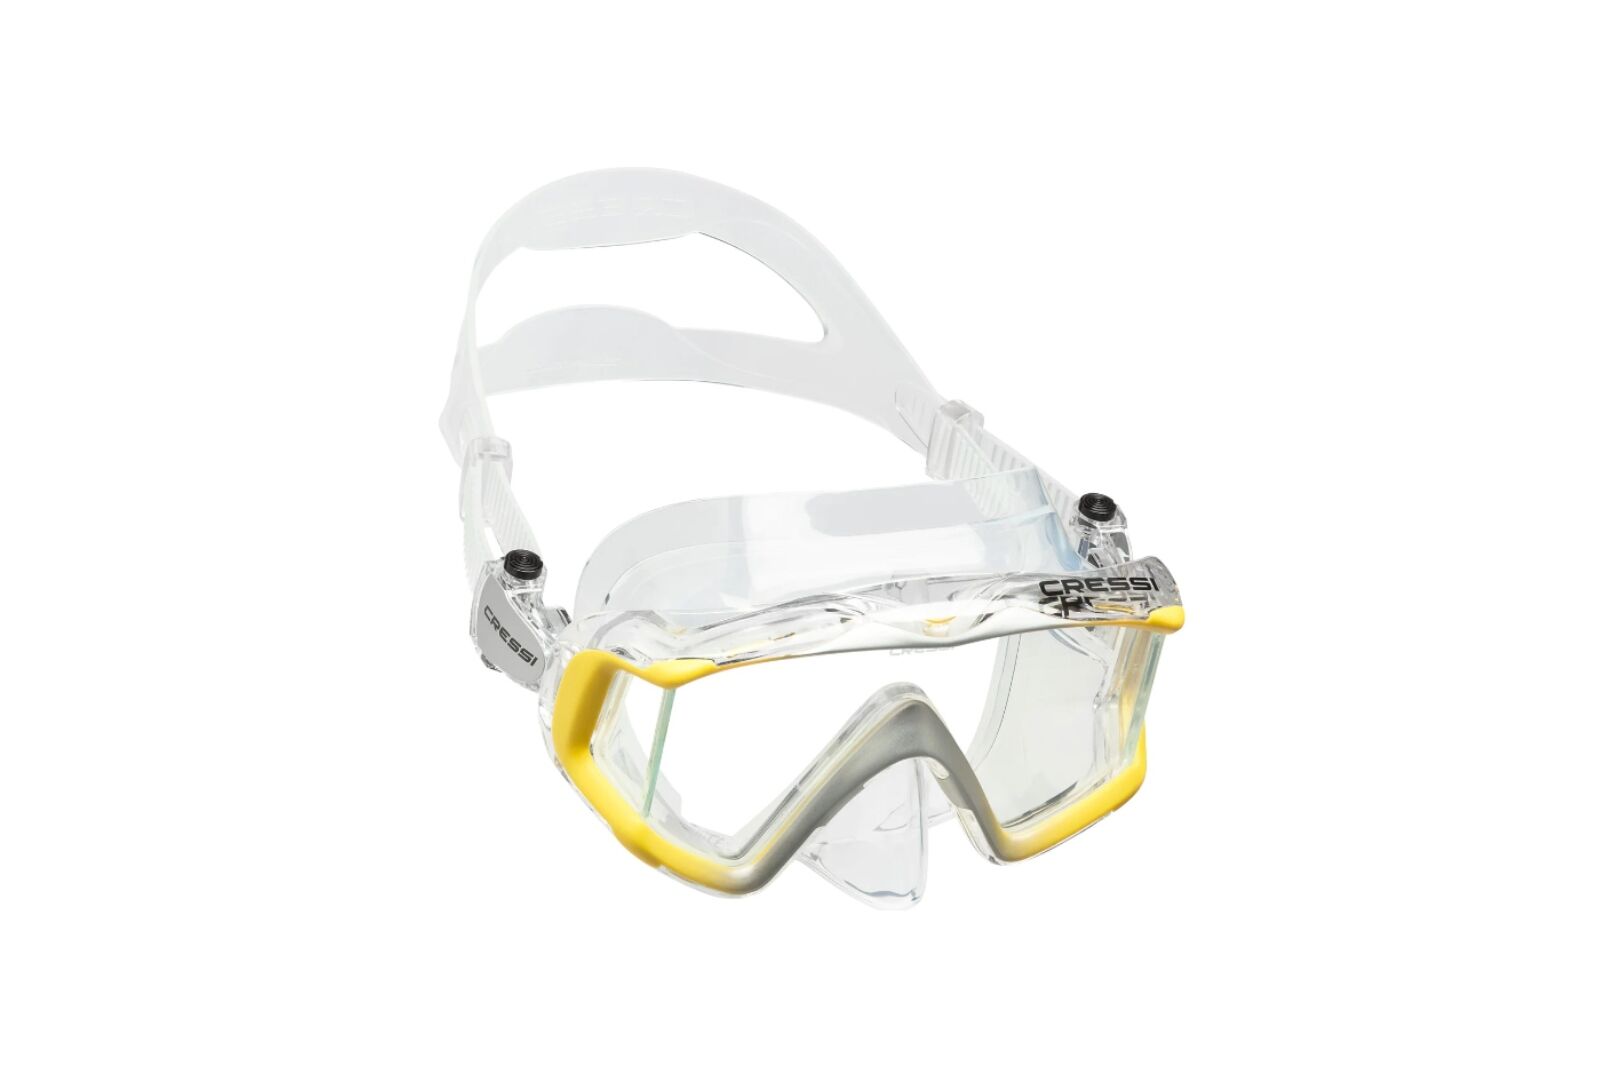 Snorkel mask from Cressi one of the most import scuba diving gear items 